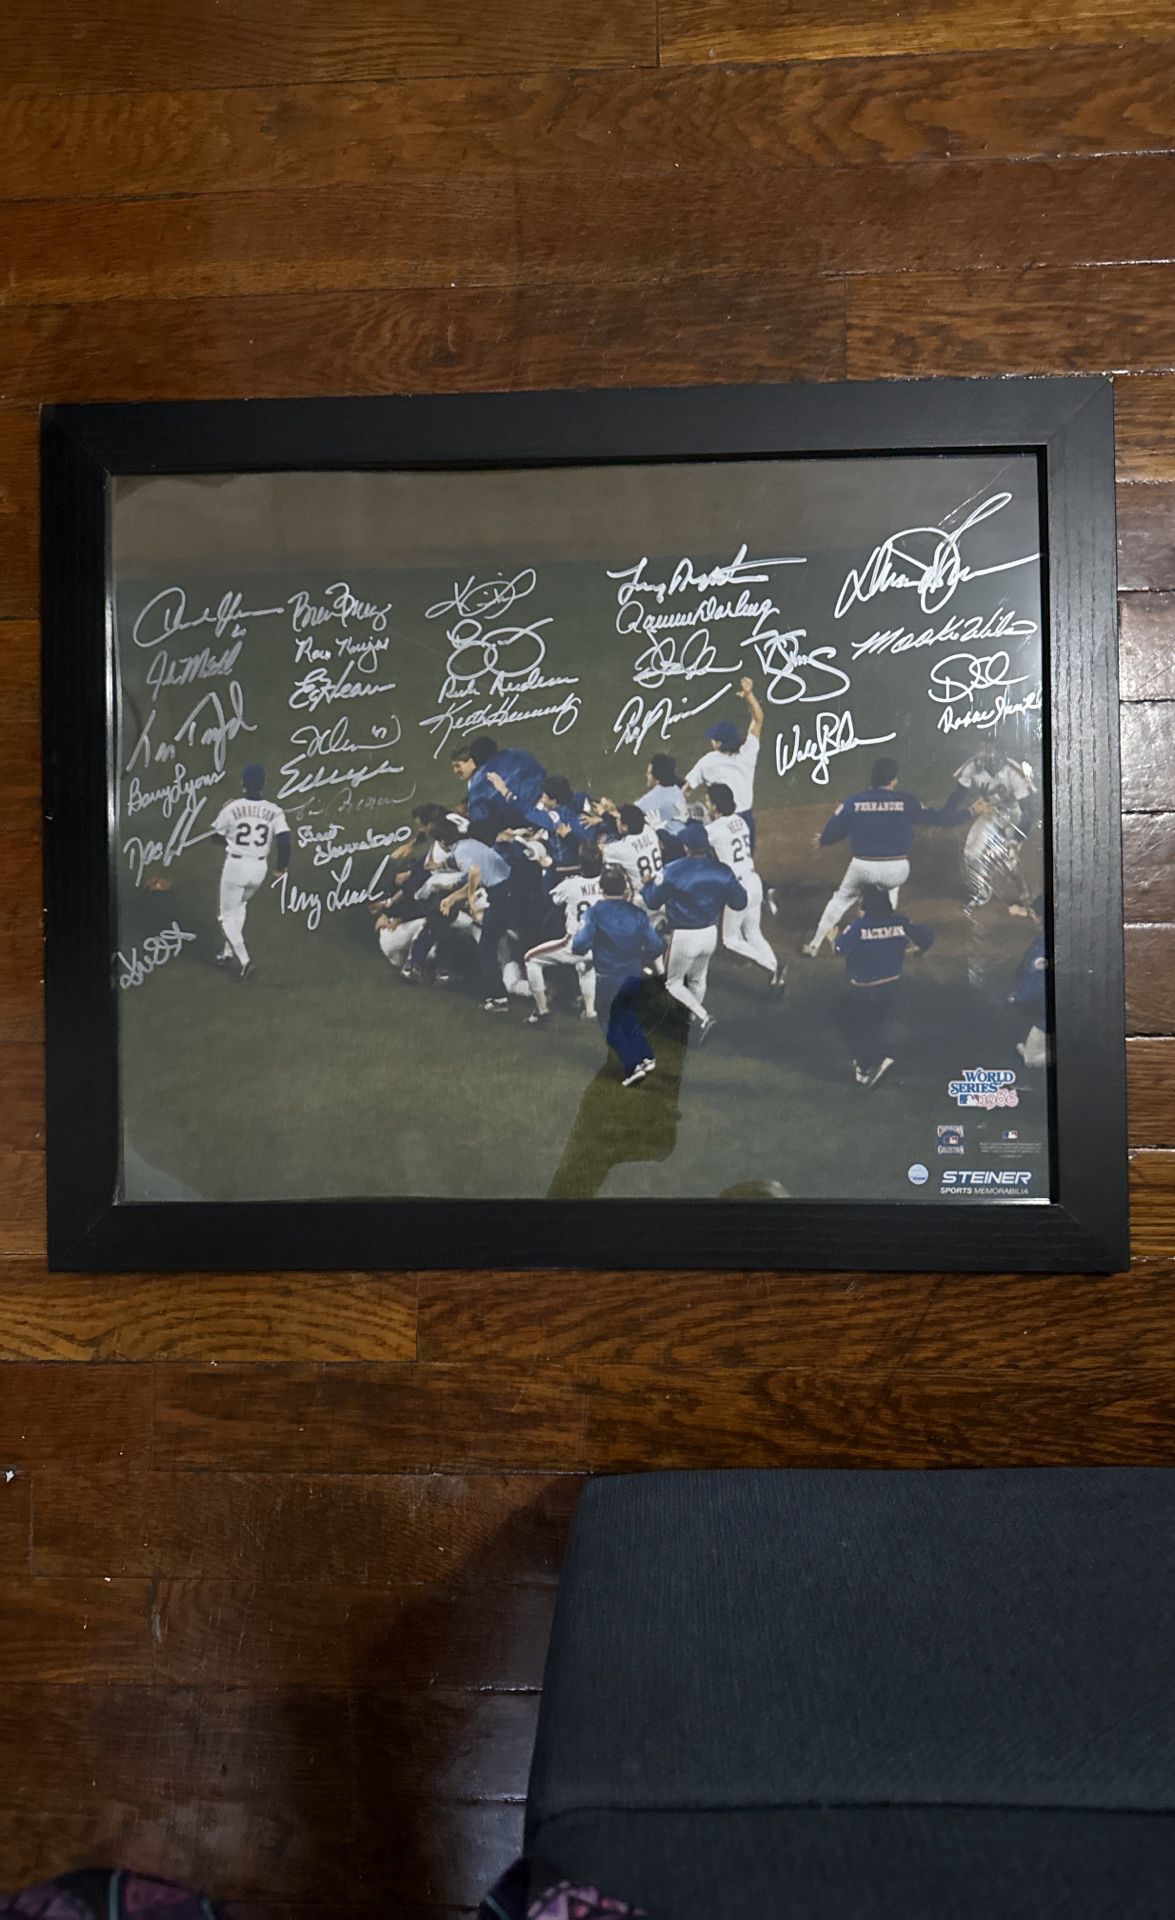 METS 1986 World Series Championship Picture Whole Team Signed..Steiner Authenticated 700$